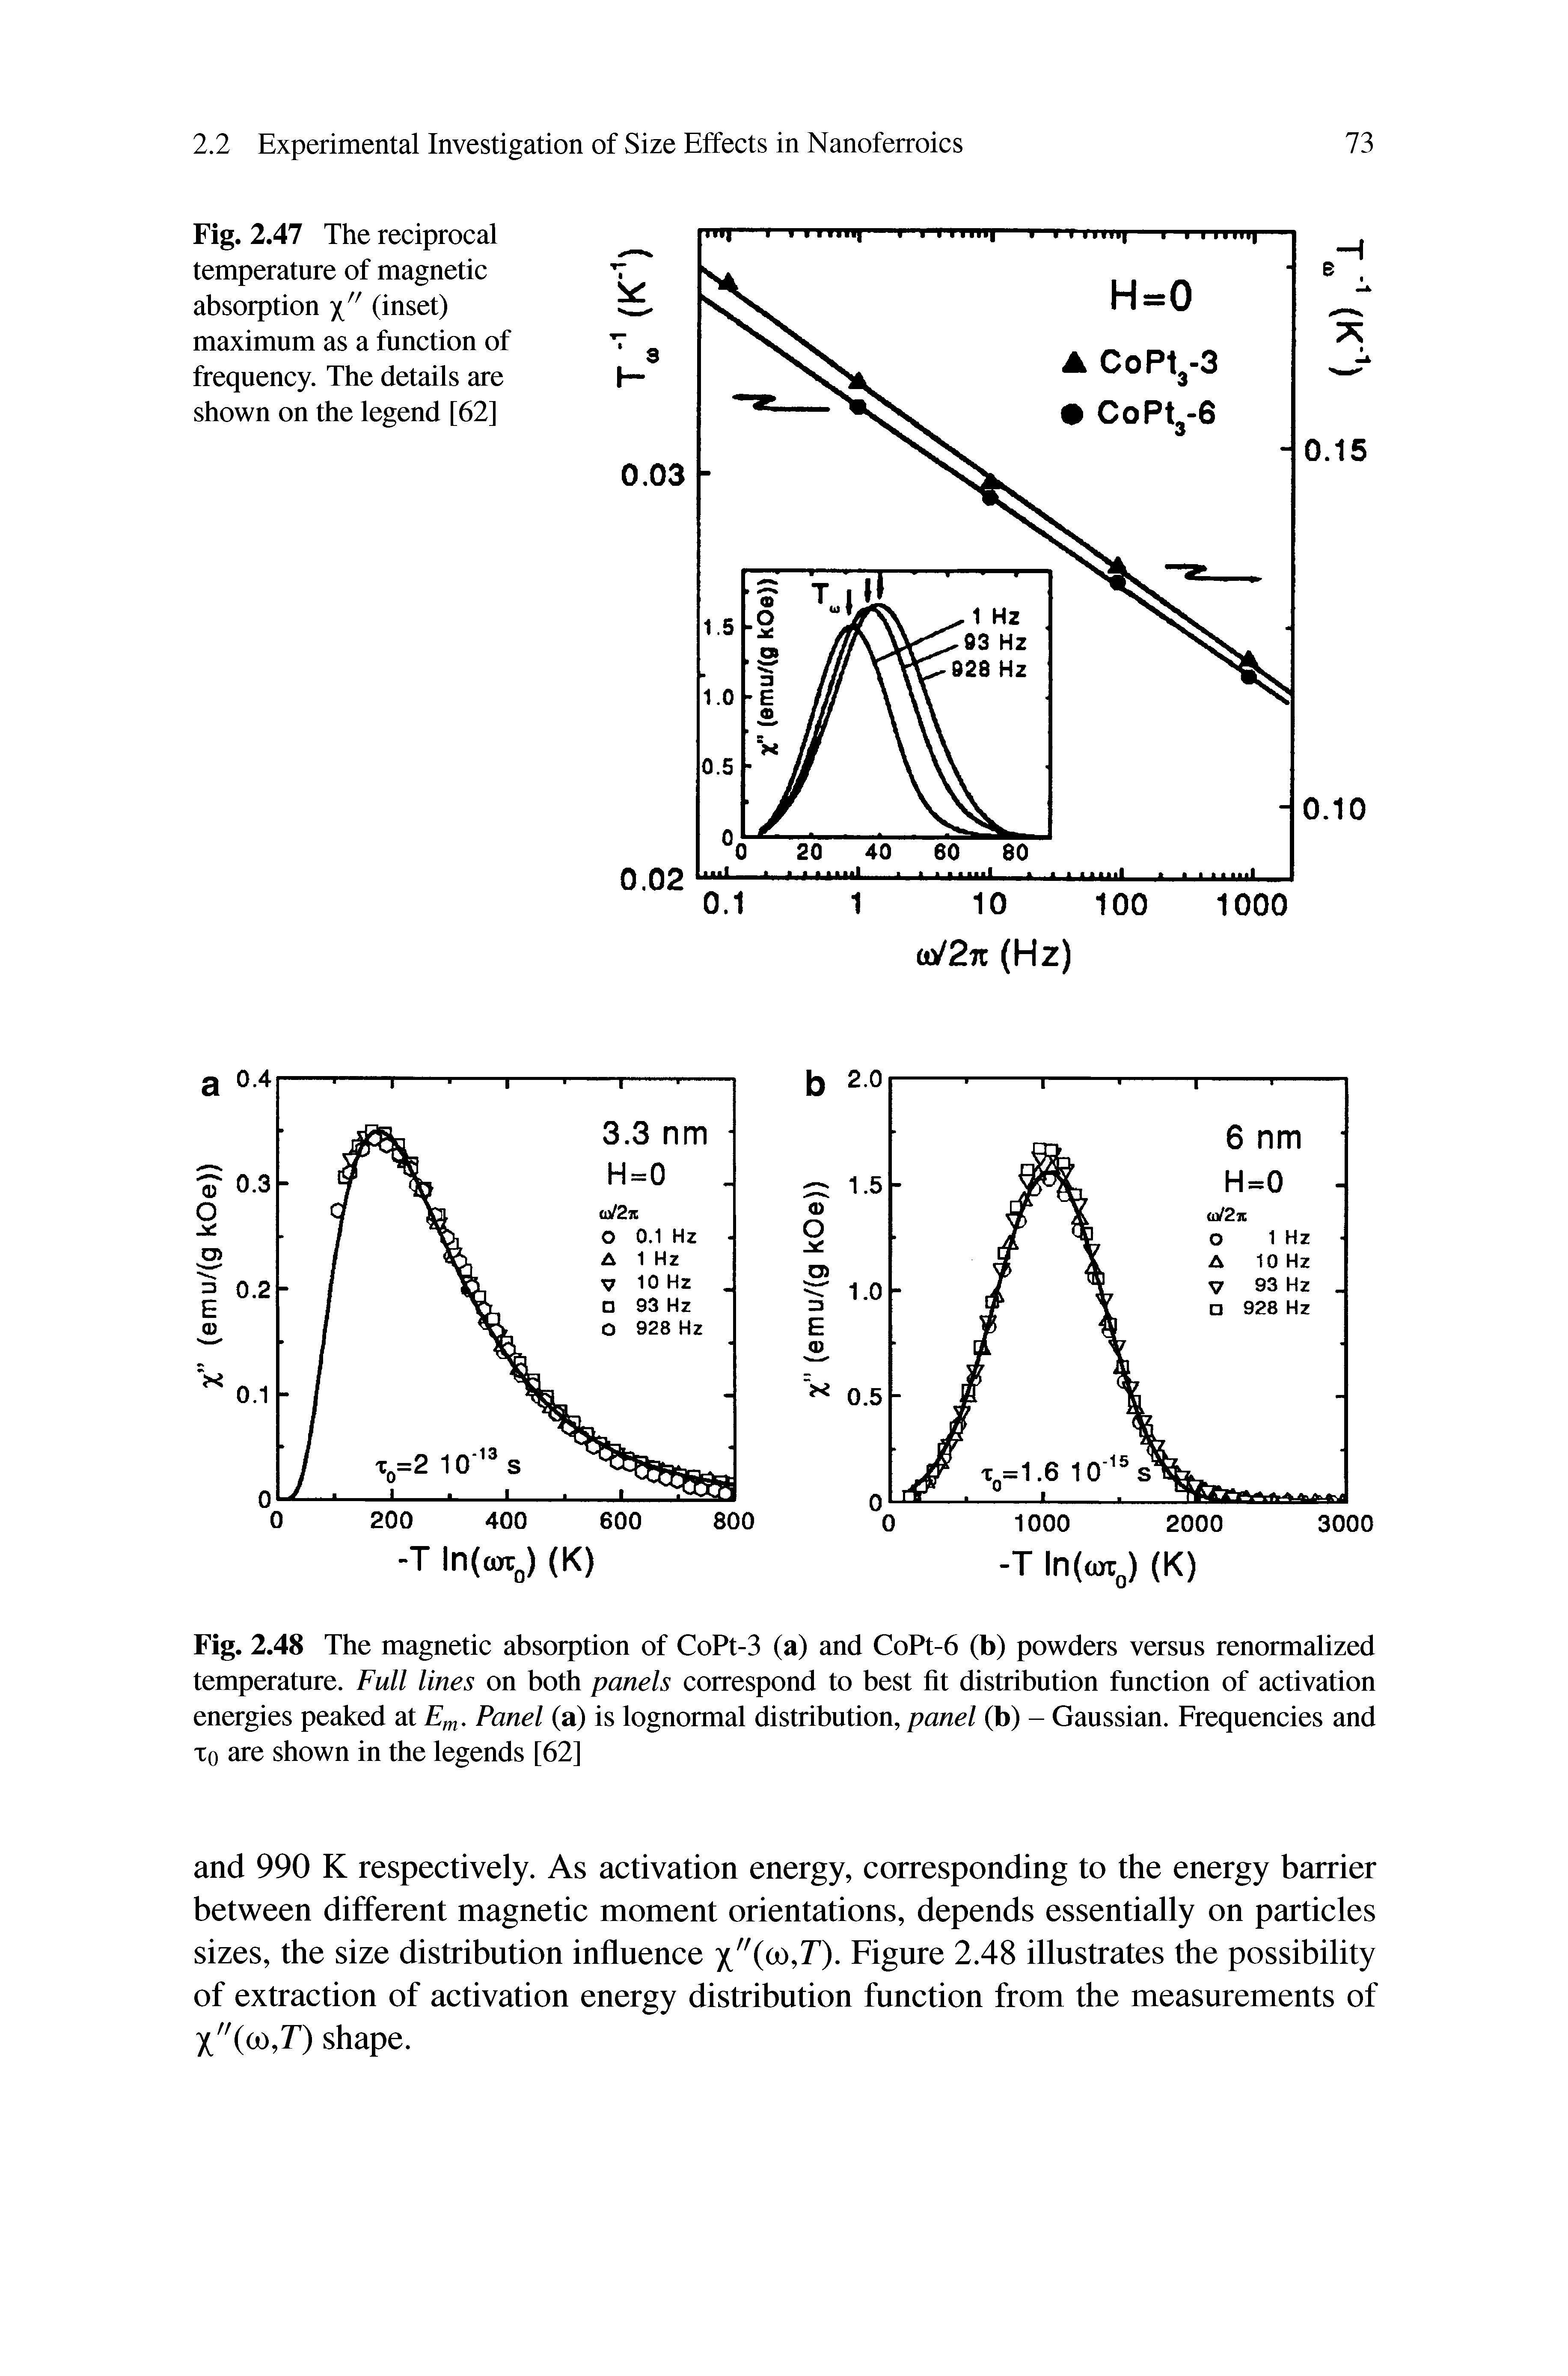 Fig. 2.48 The magnetic absorption of CoPt-3 (a) and CoPt-6 (b) powders versus renormalized temperature. Full lines on both panels correspond to best fit distribution function of activation energies peaked at Panel (a) is lognormal distribution, panel (b) - Gaussian, Frequencies and To are shown in the legends [62]...